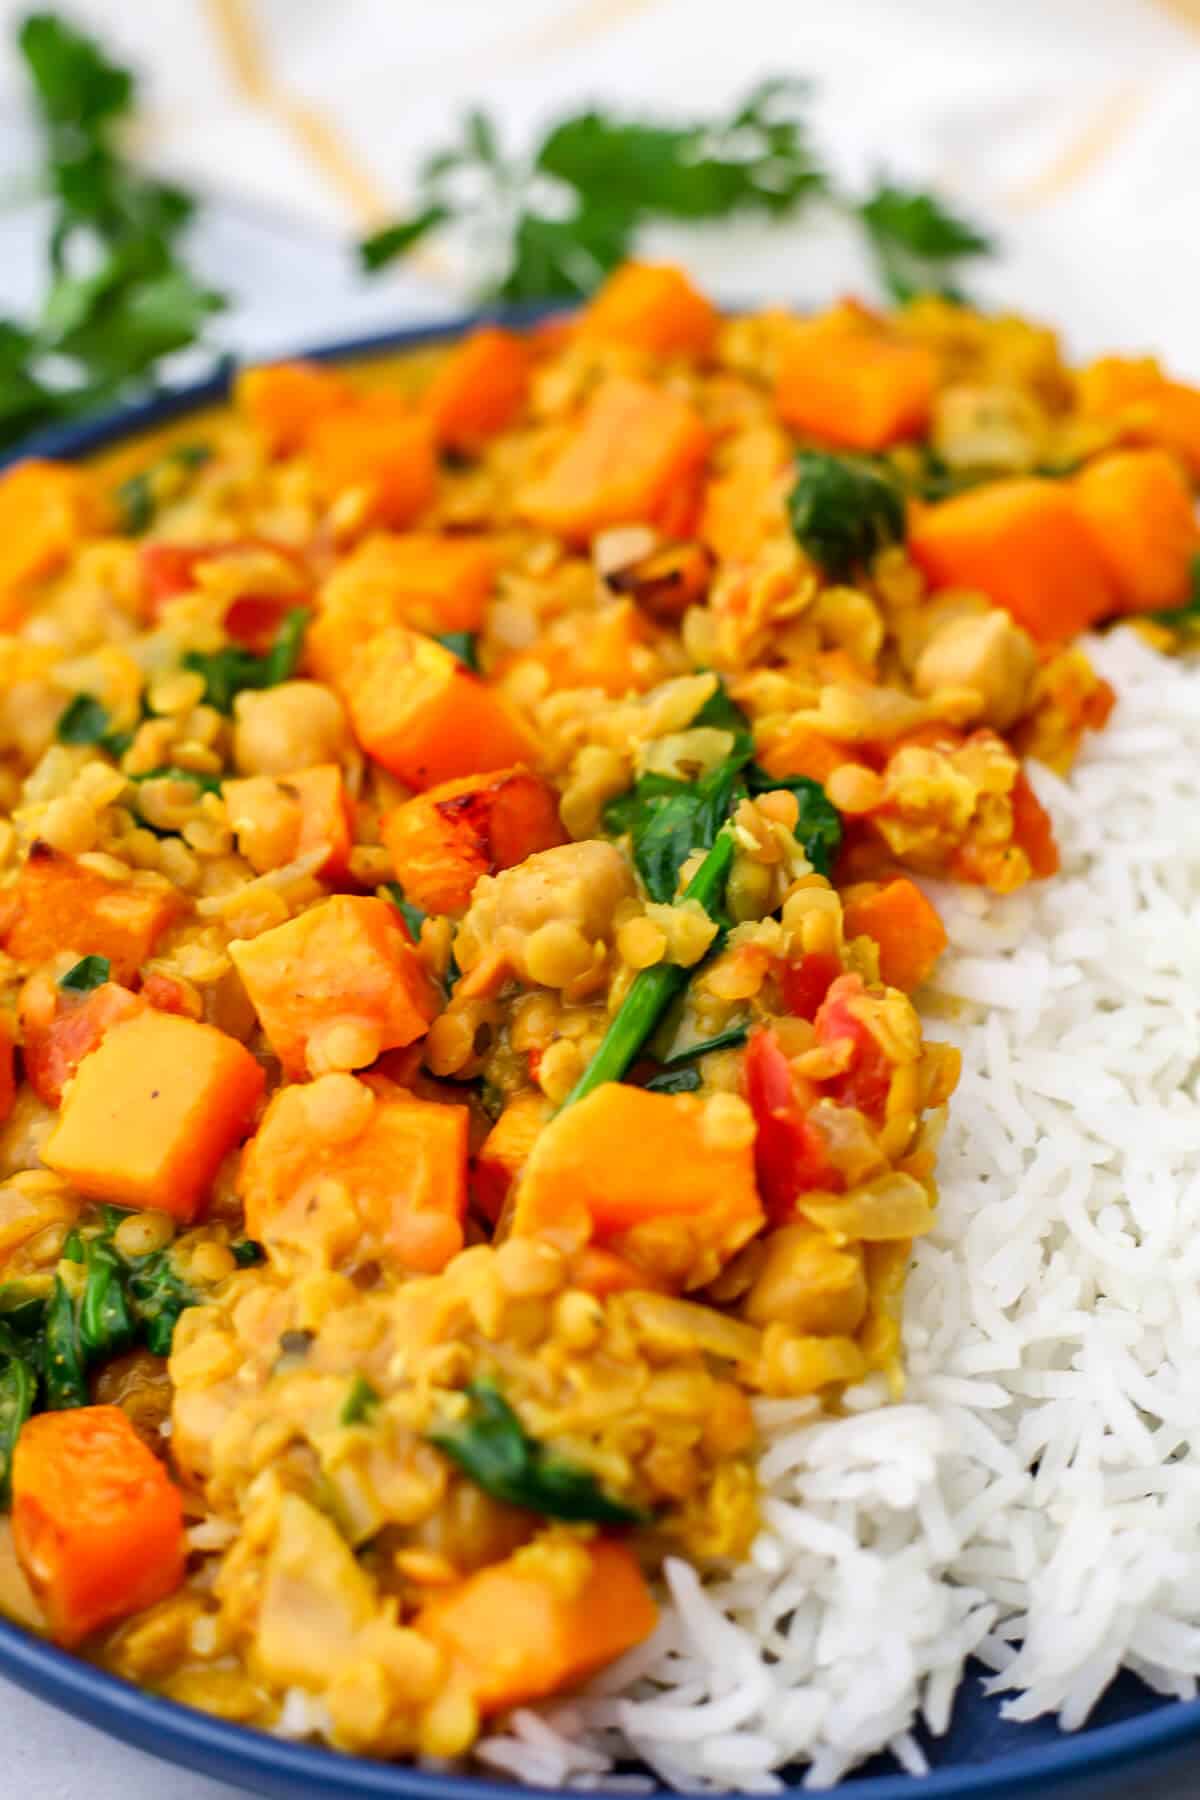 A close up of a plate with white rice and squash curry with chickpeas, lentils, and spinach in a creamy coconut sauce.